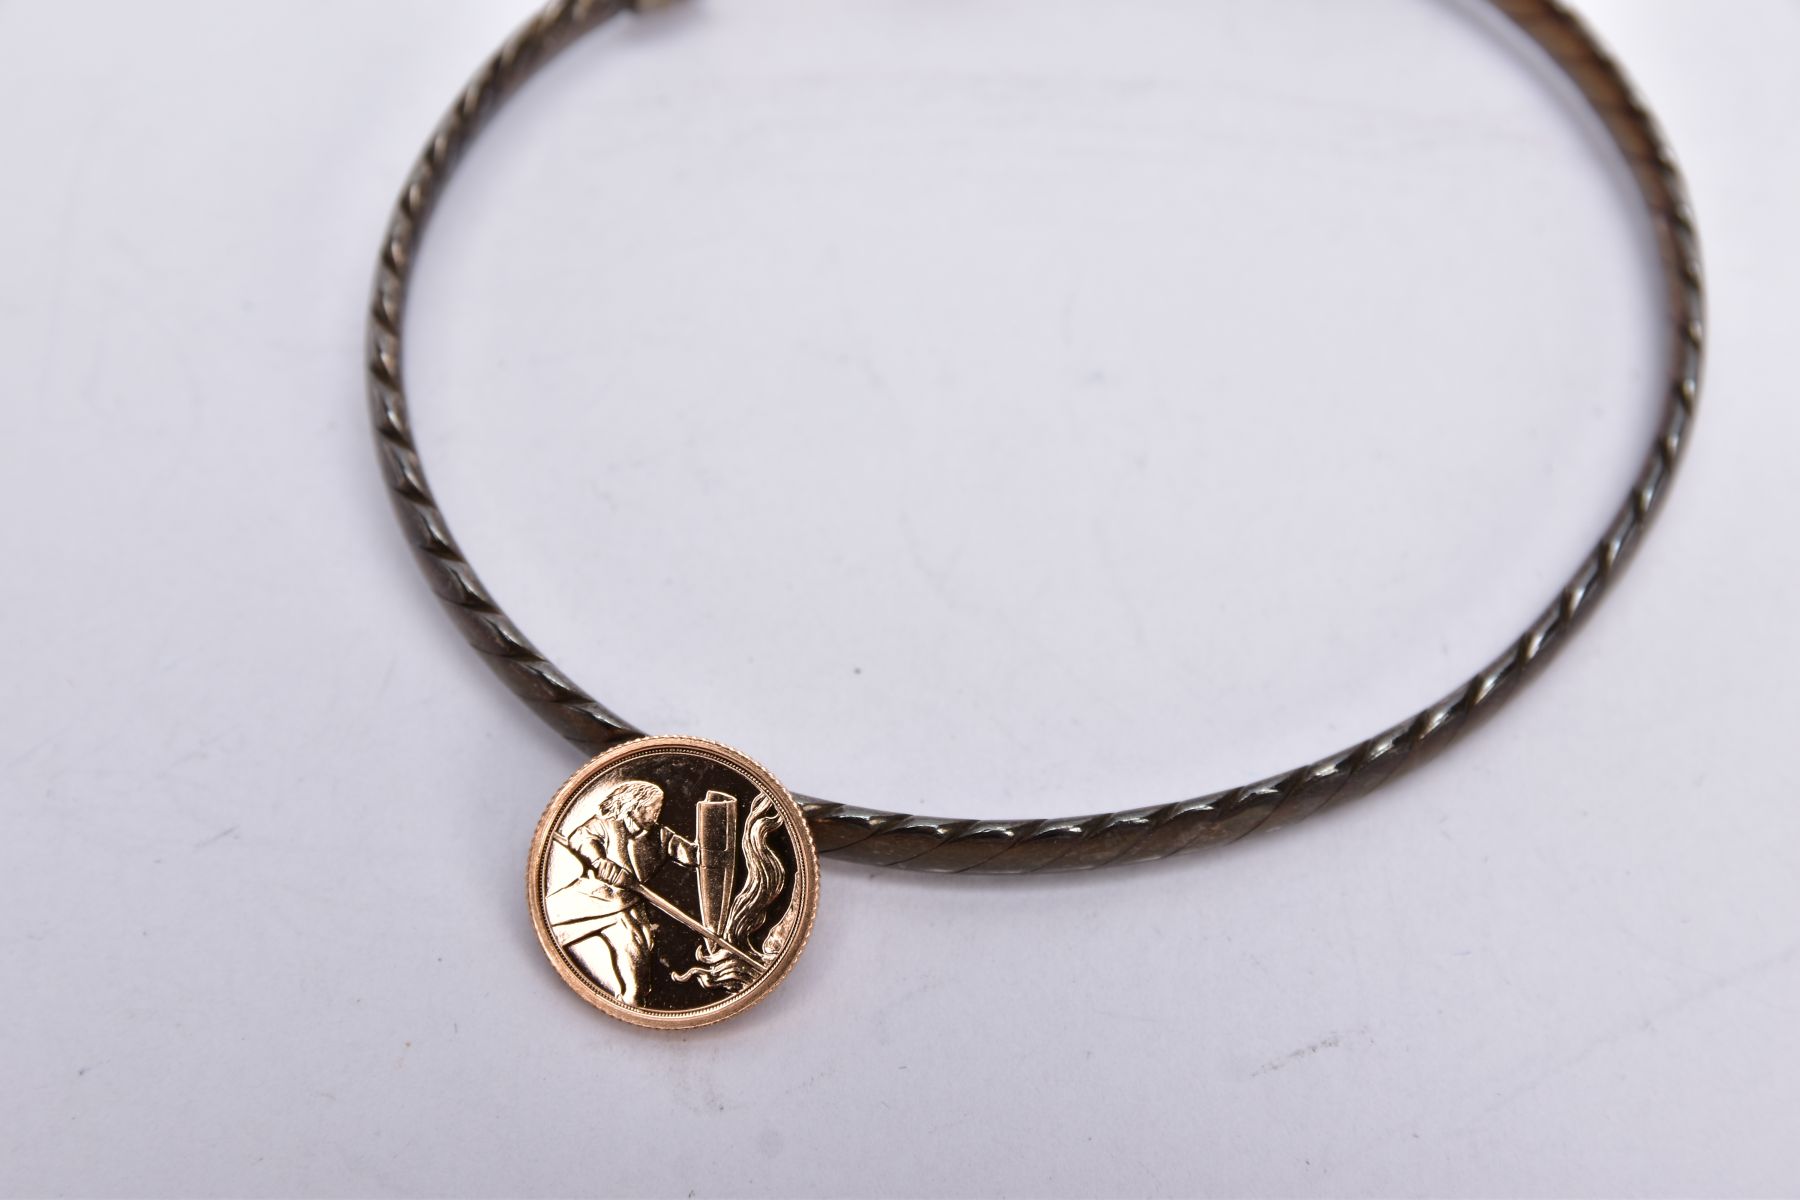 A SILVER AND 18CT GOLD BANGLE WITH A YELLOW METAL COIN, the silver bangle of a rope twist design - Image 2 of 3